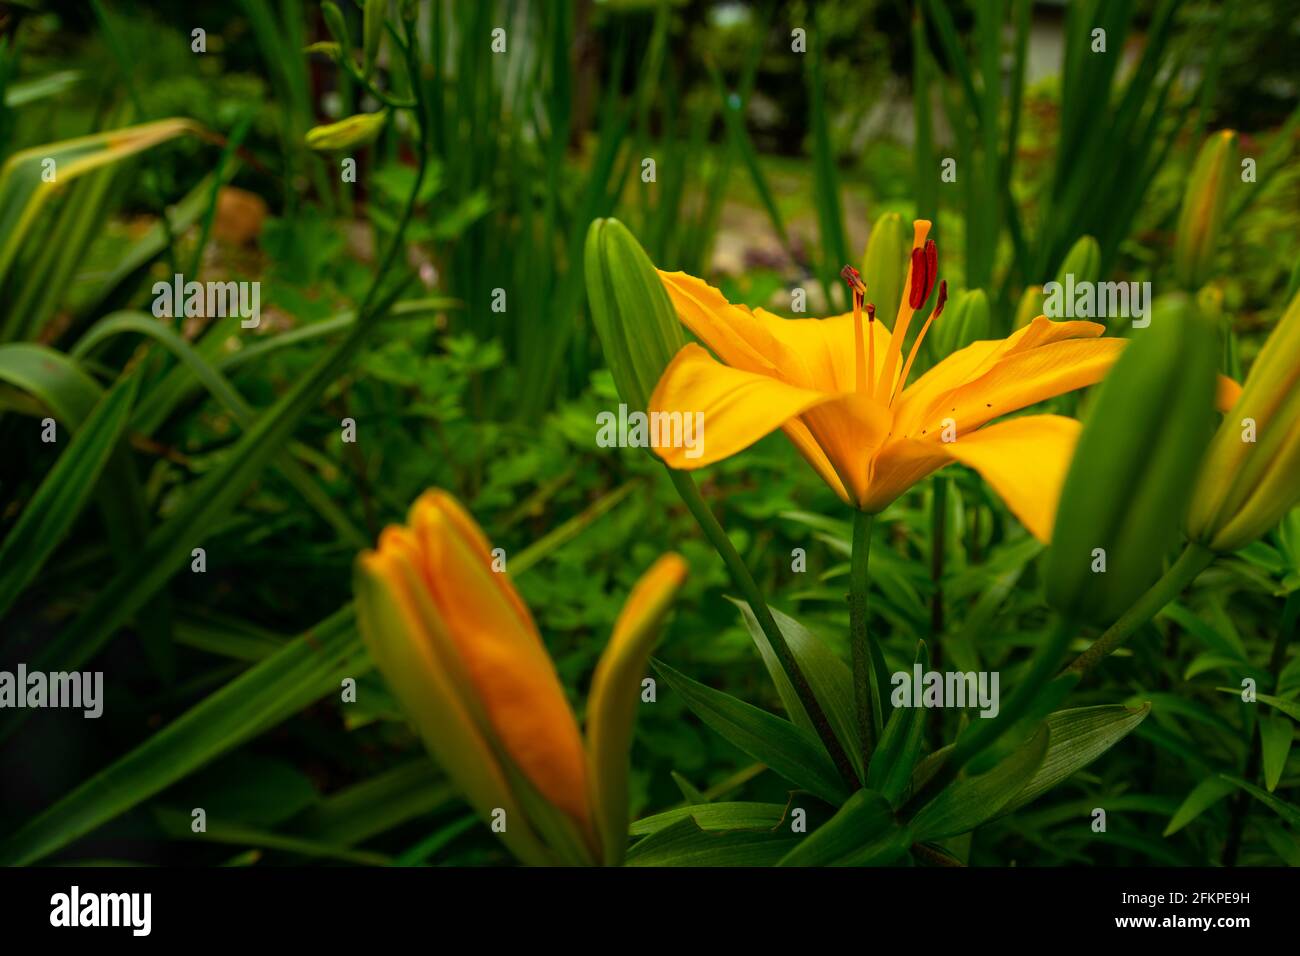 Yellow lily flower in the green garden Stock Photo - Alamy